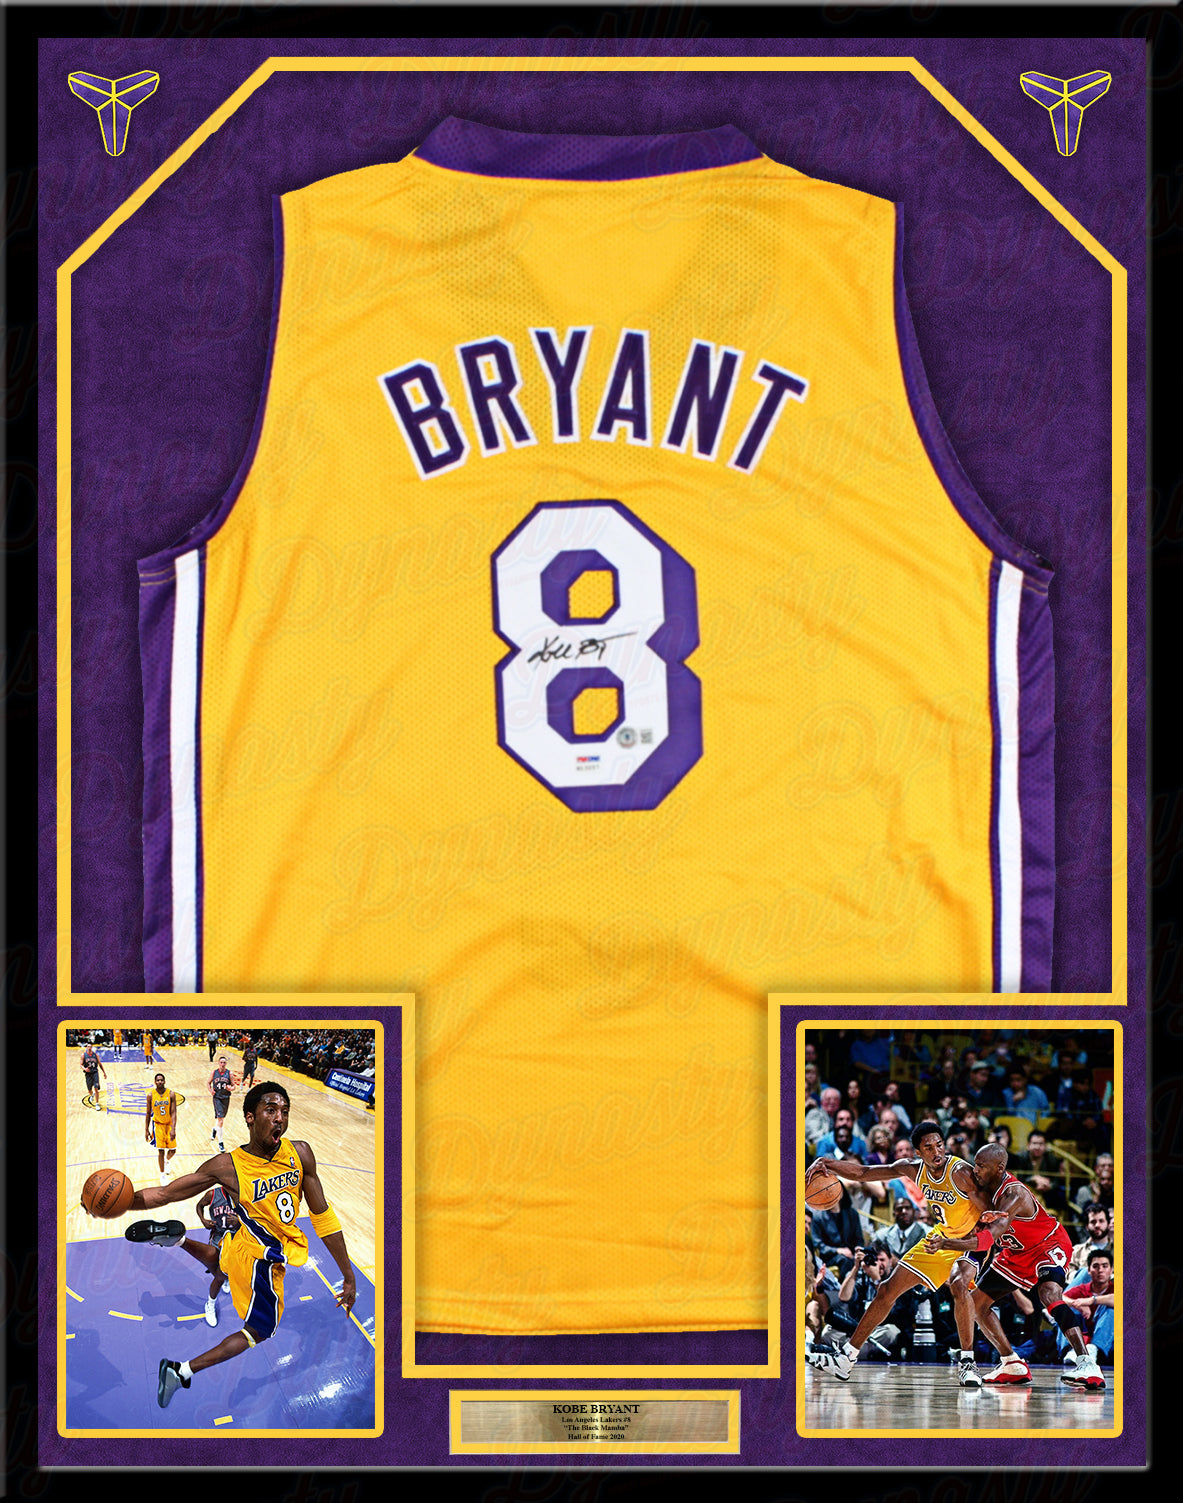 Kobe Bryant Los Angeles Lakers Autographed Framed Basketball Jersey Collage - Dynasty Sports & Framing 